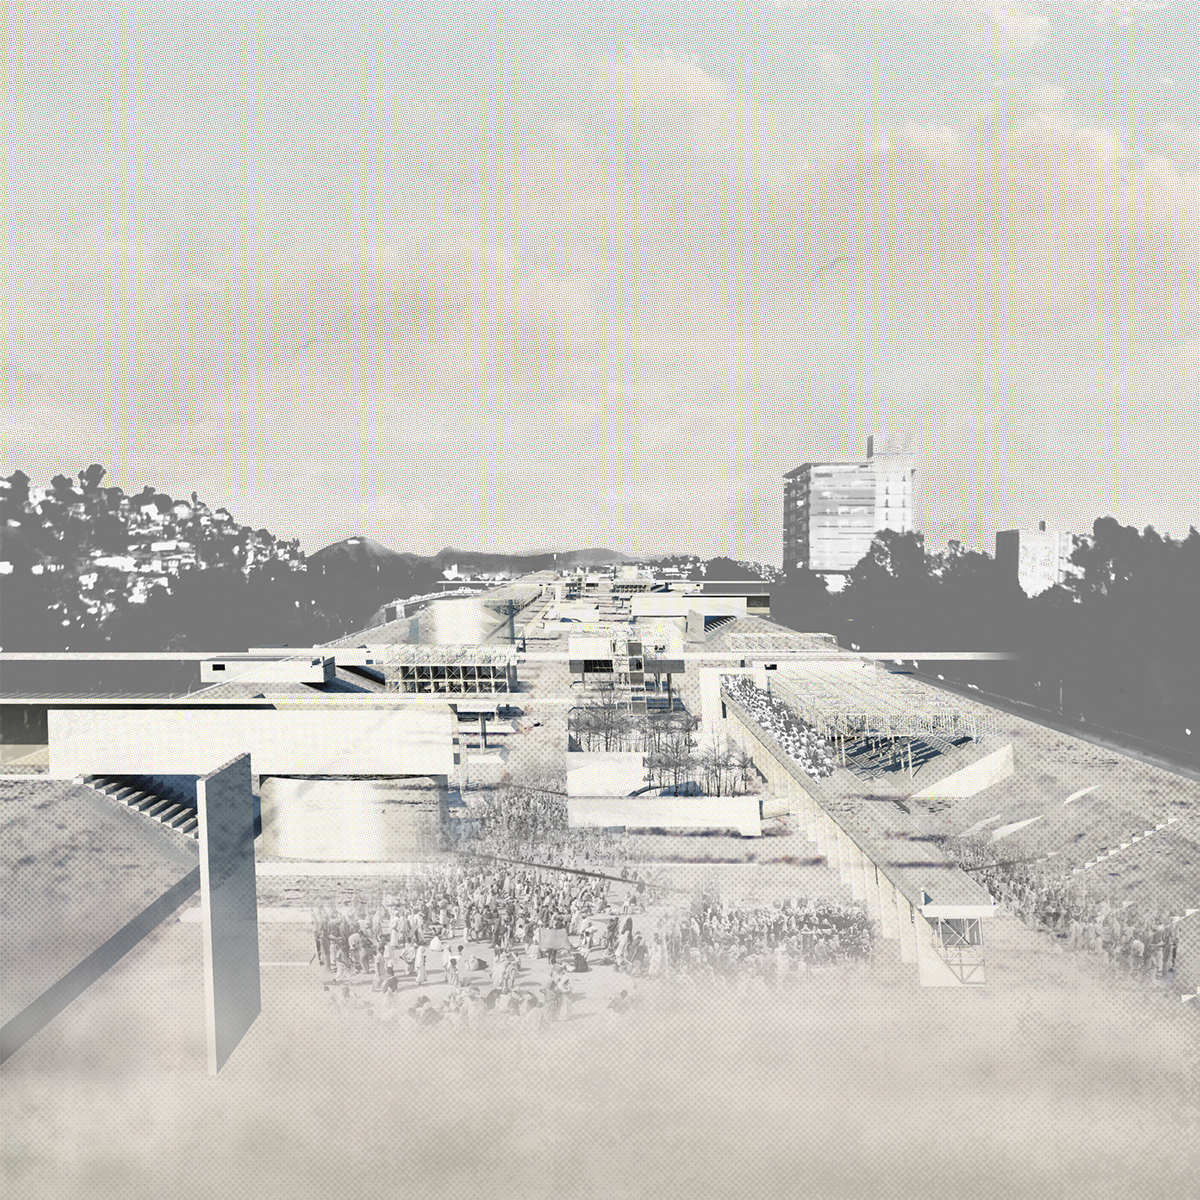 Undergraduate Thesis Thesis Project architecture school handrawing tijuana river mexico